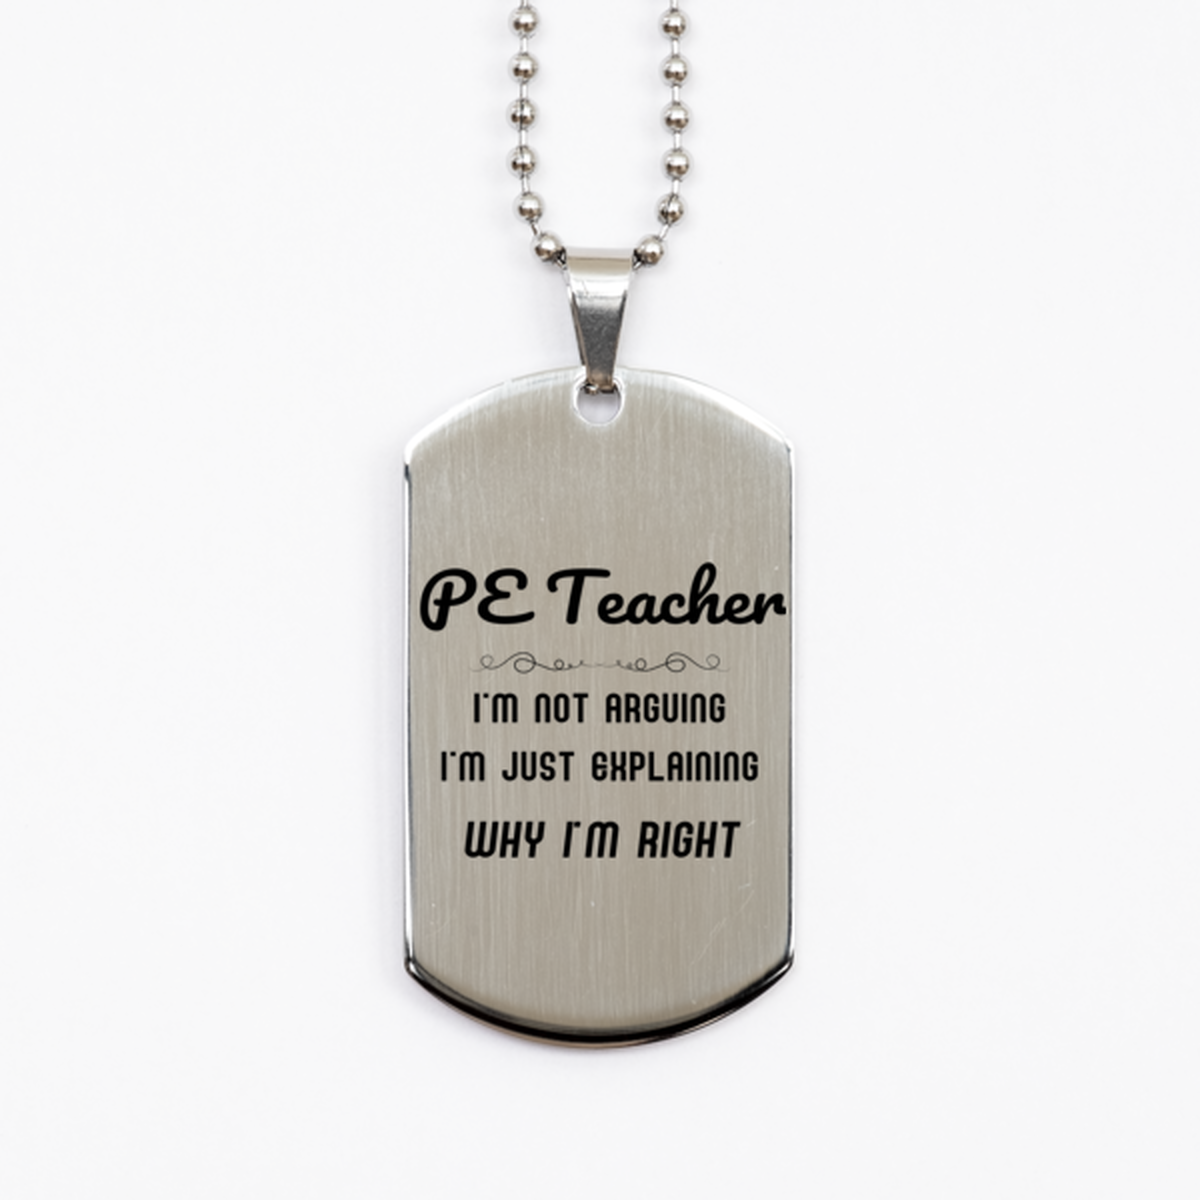 PE Teacher I'm not Arguing. I'm Just Explaining Why I'm RIGHT Silver Dog Tag, Funny Saying Quote PE Teacher Gifts For PE Teacher Graduation Birthday Christmas Gifts for Men Women Coworker